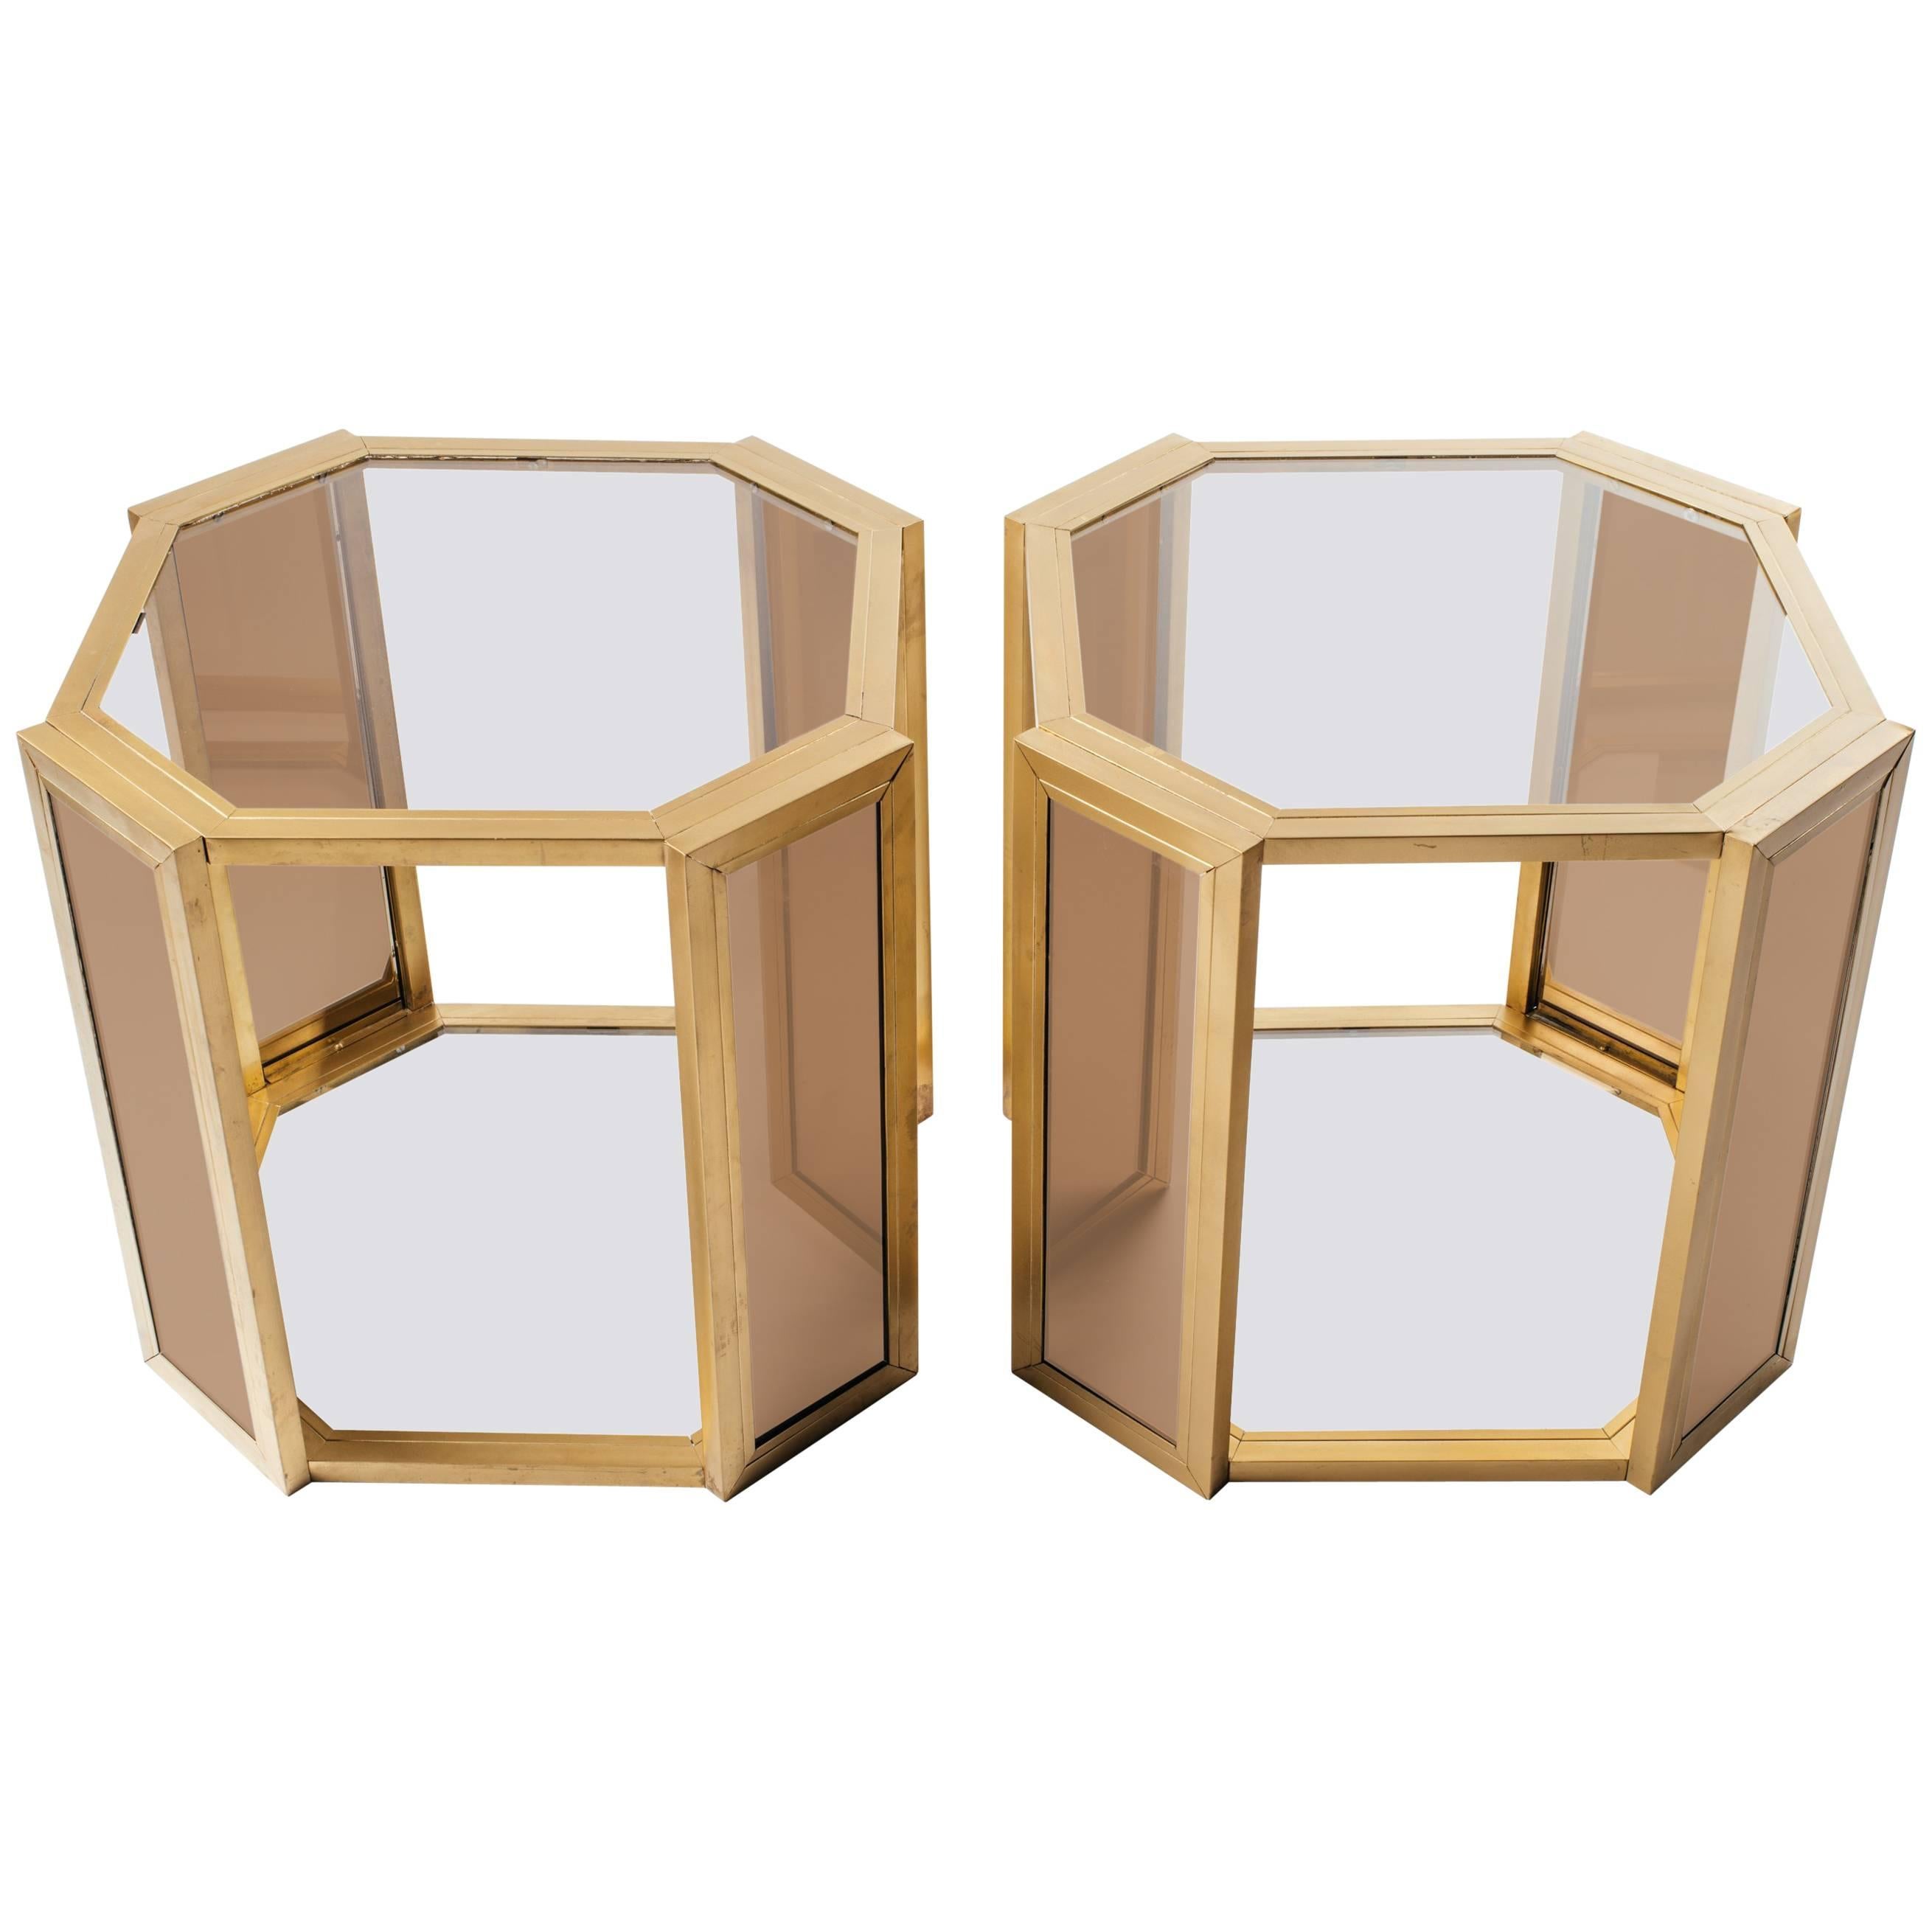 Two-tier Hollywood Regency side tables with hexagon form. Comprised of dark brass frames with smoked grey glass tops and fitted with smoked mirrored insets on all legs.